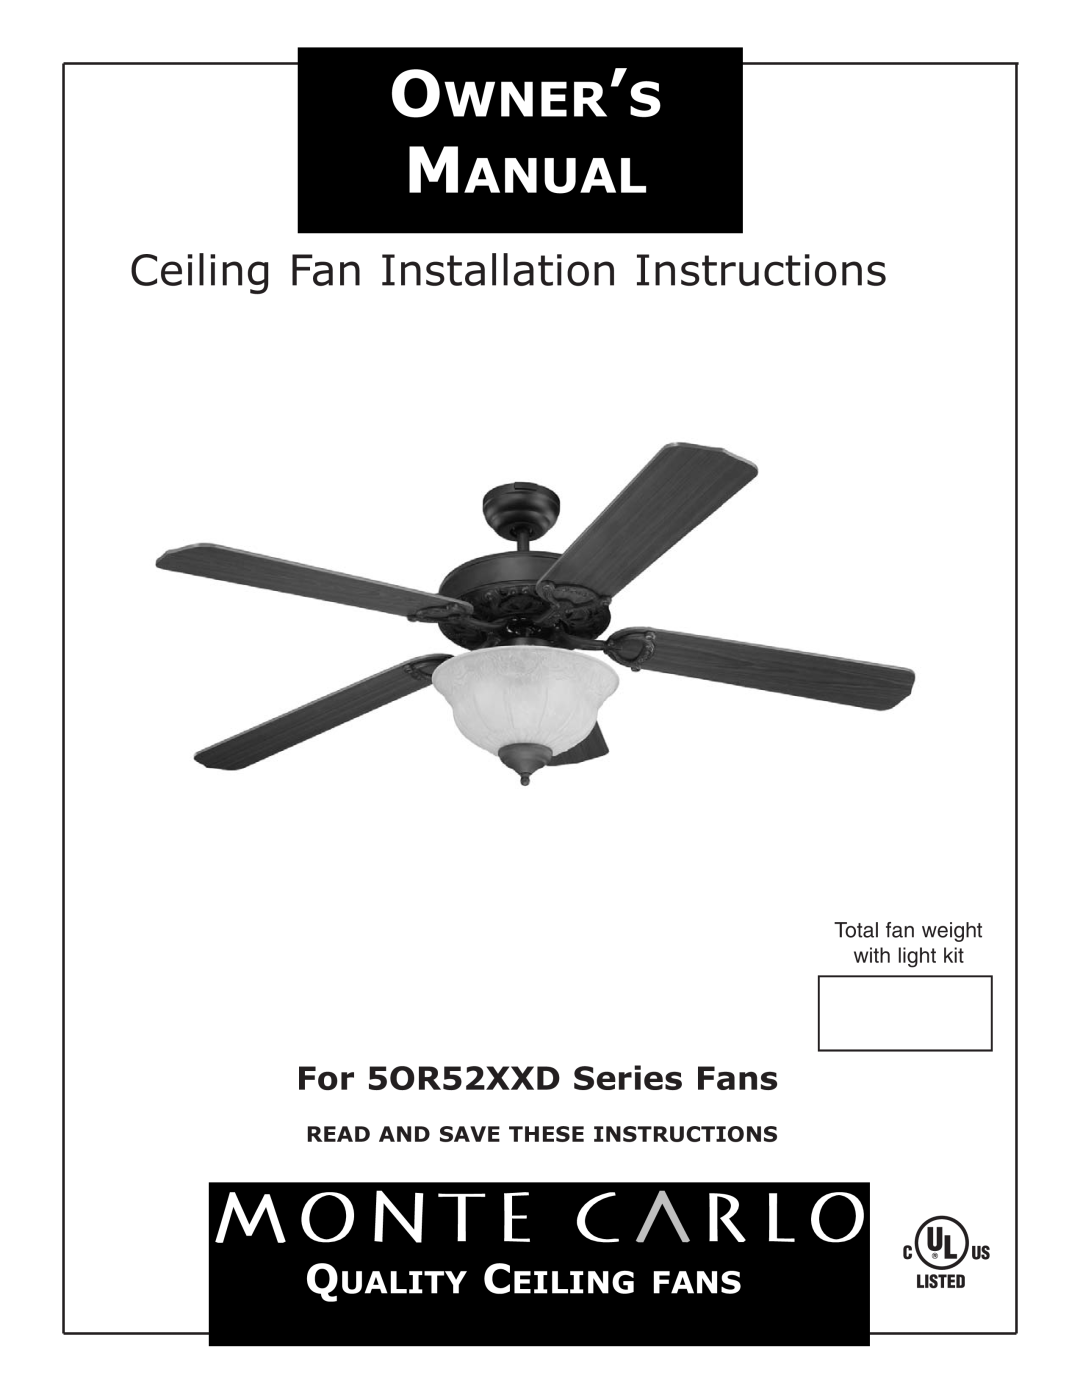 Monte Carlo Fan Company installation instructions For 5OR52XXD Series Fans, Read And Save These Instructions 